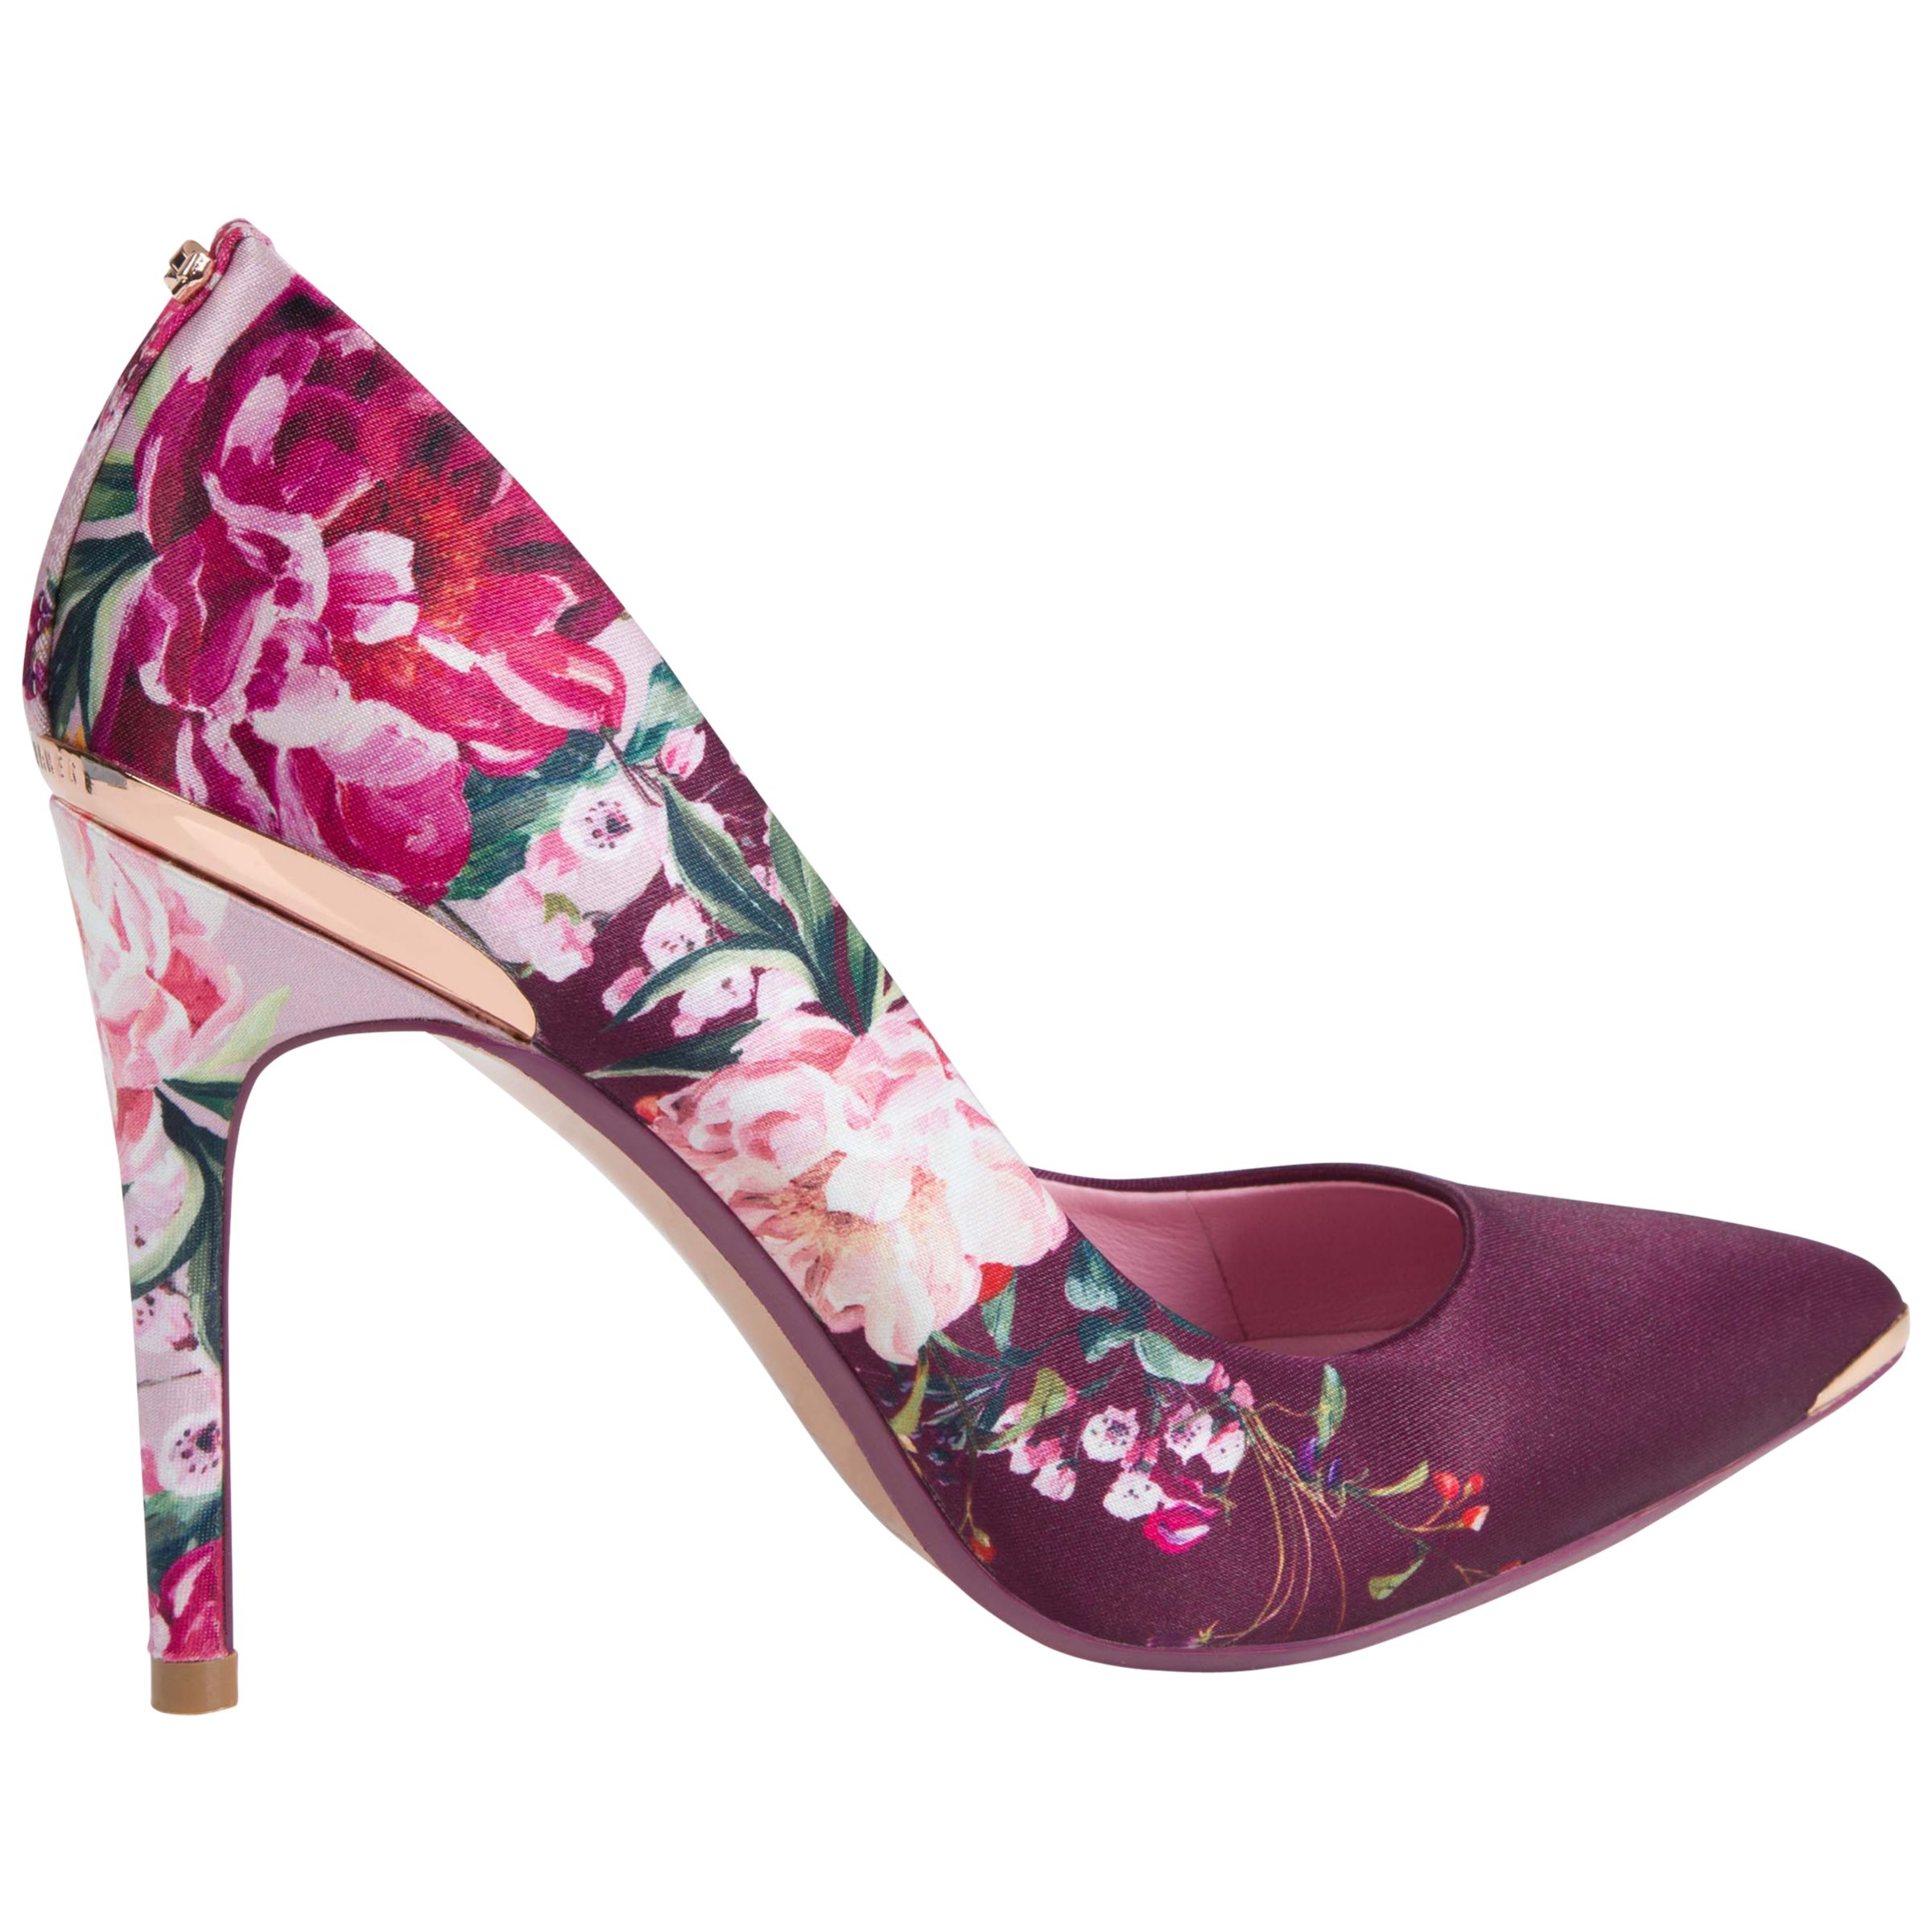 Ted Baker Kawaap Textile Heeled Court Shoes, Pink Multi, 3